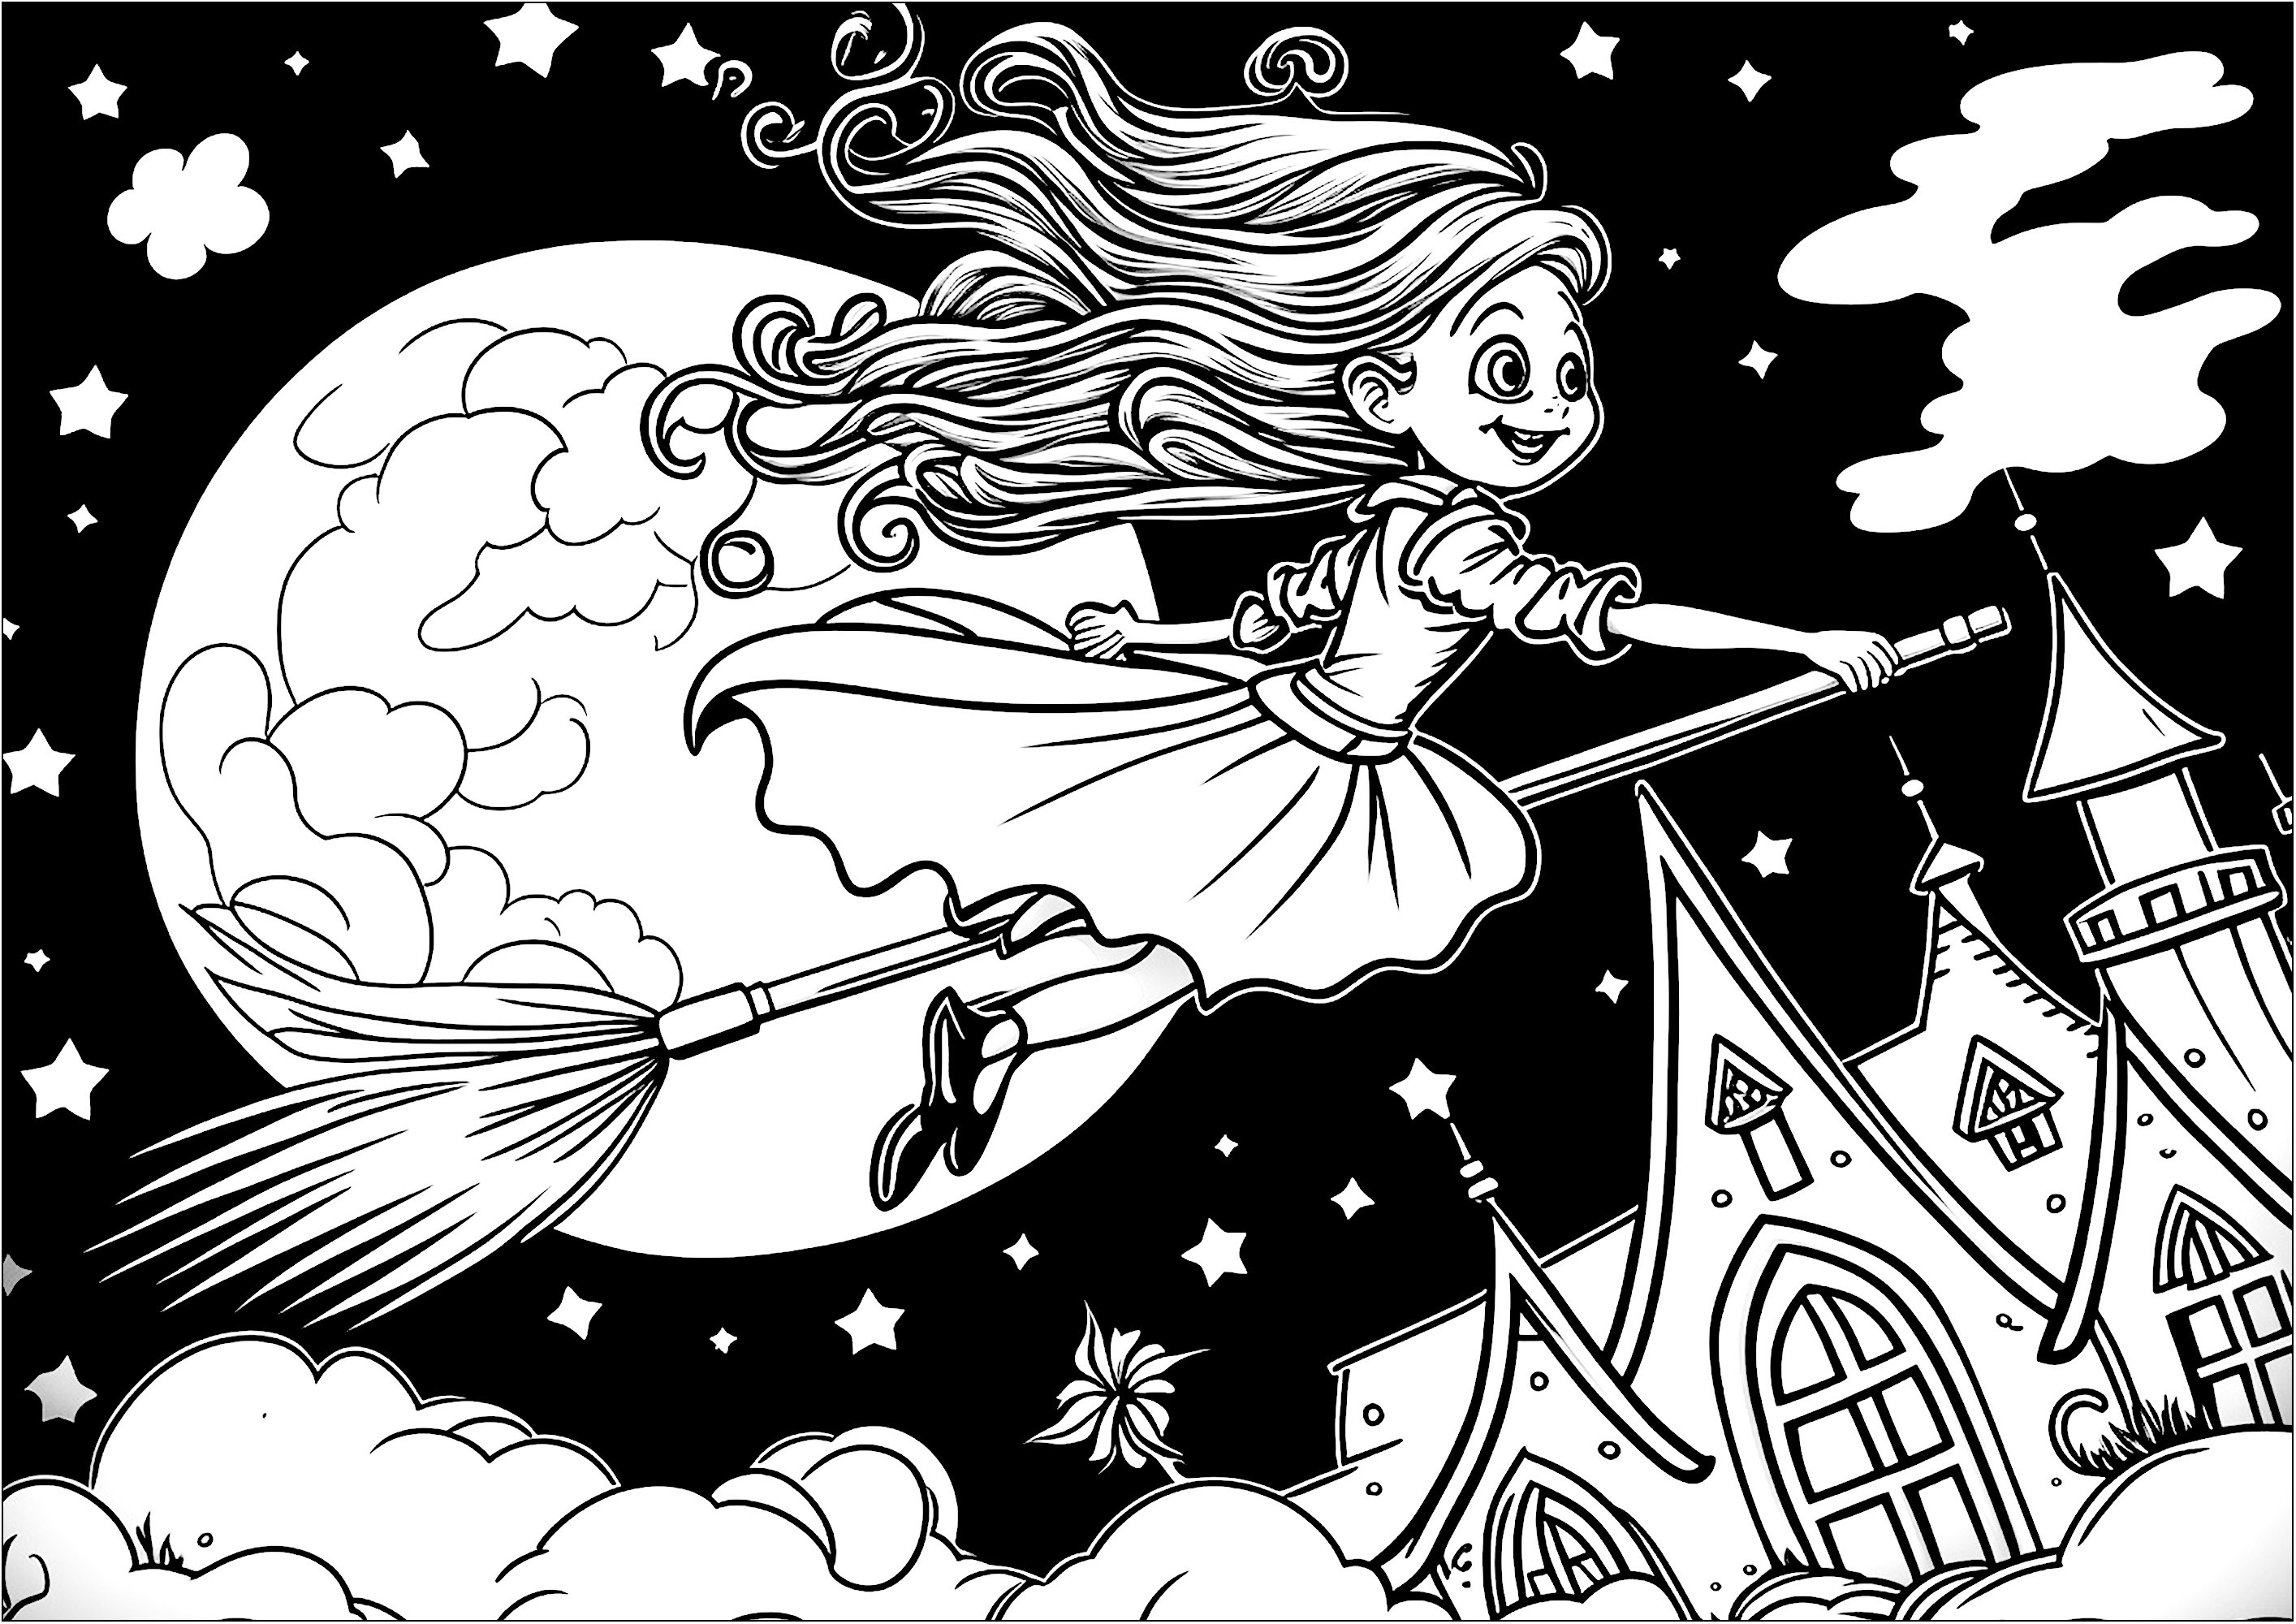 Coloring of a young witch on a broom. Color this witch flying on her broom through a starry sky, in front of the full moon, looking giant.